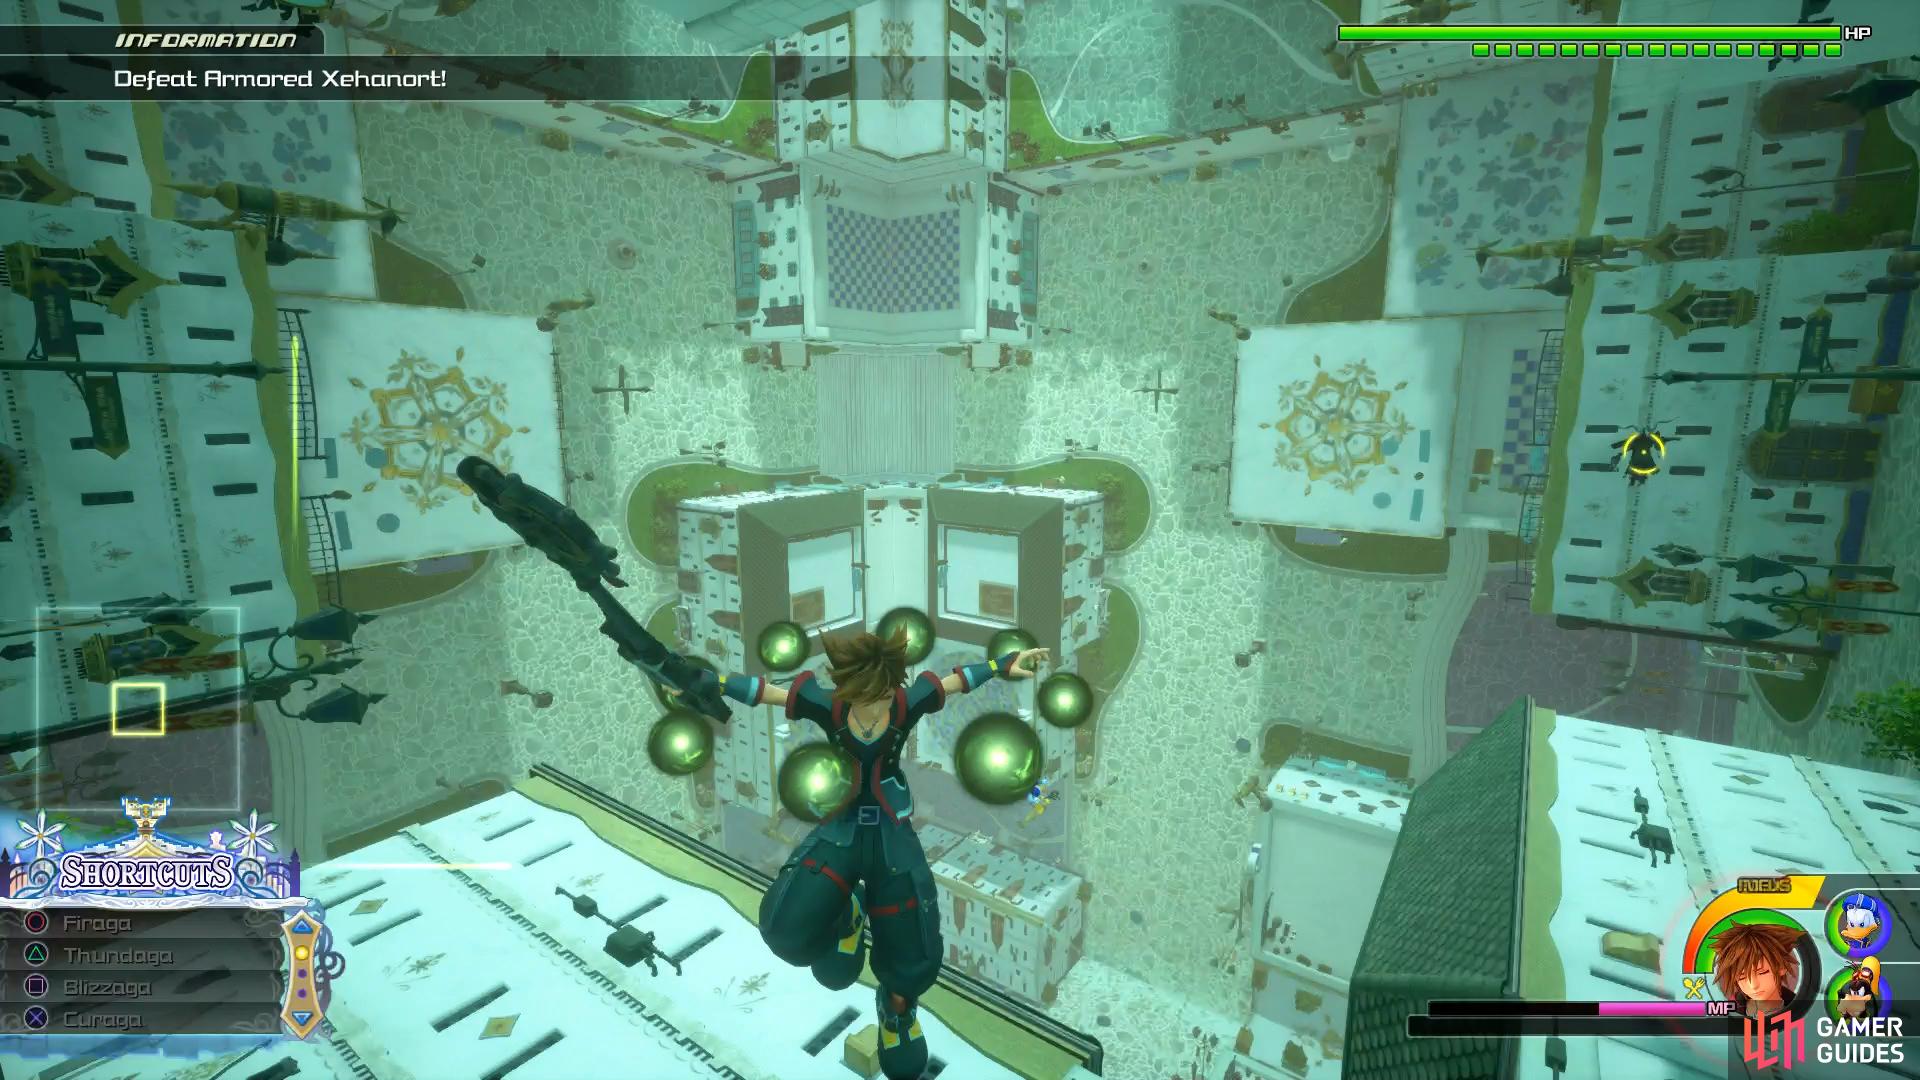 The Green Orbs will teleport you next to Armored Xehanort